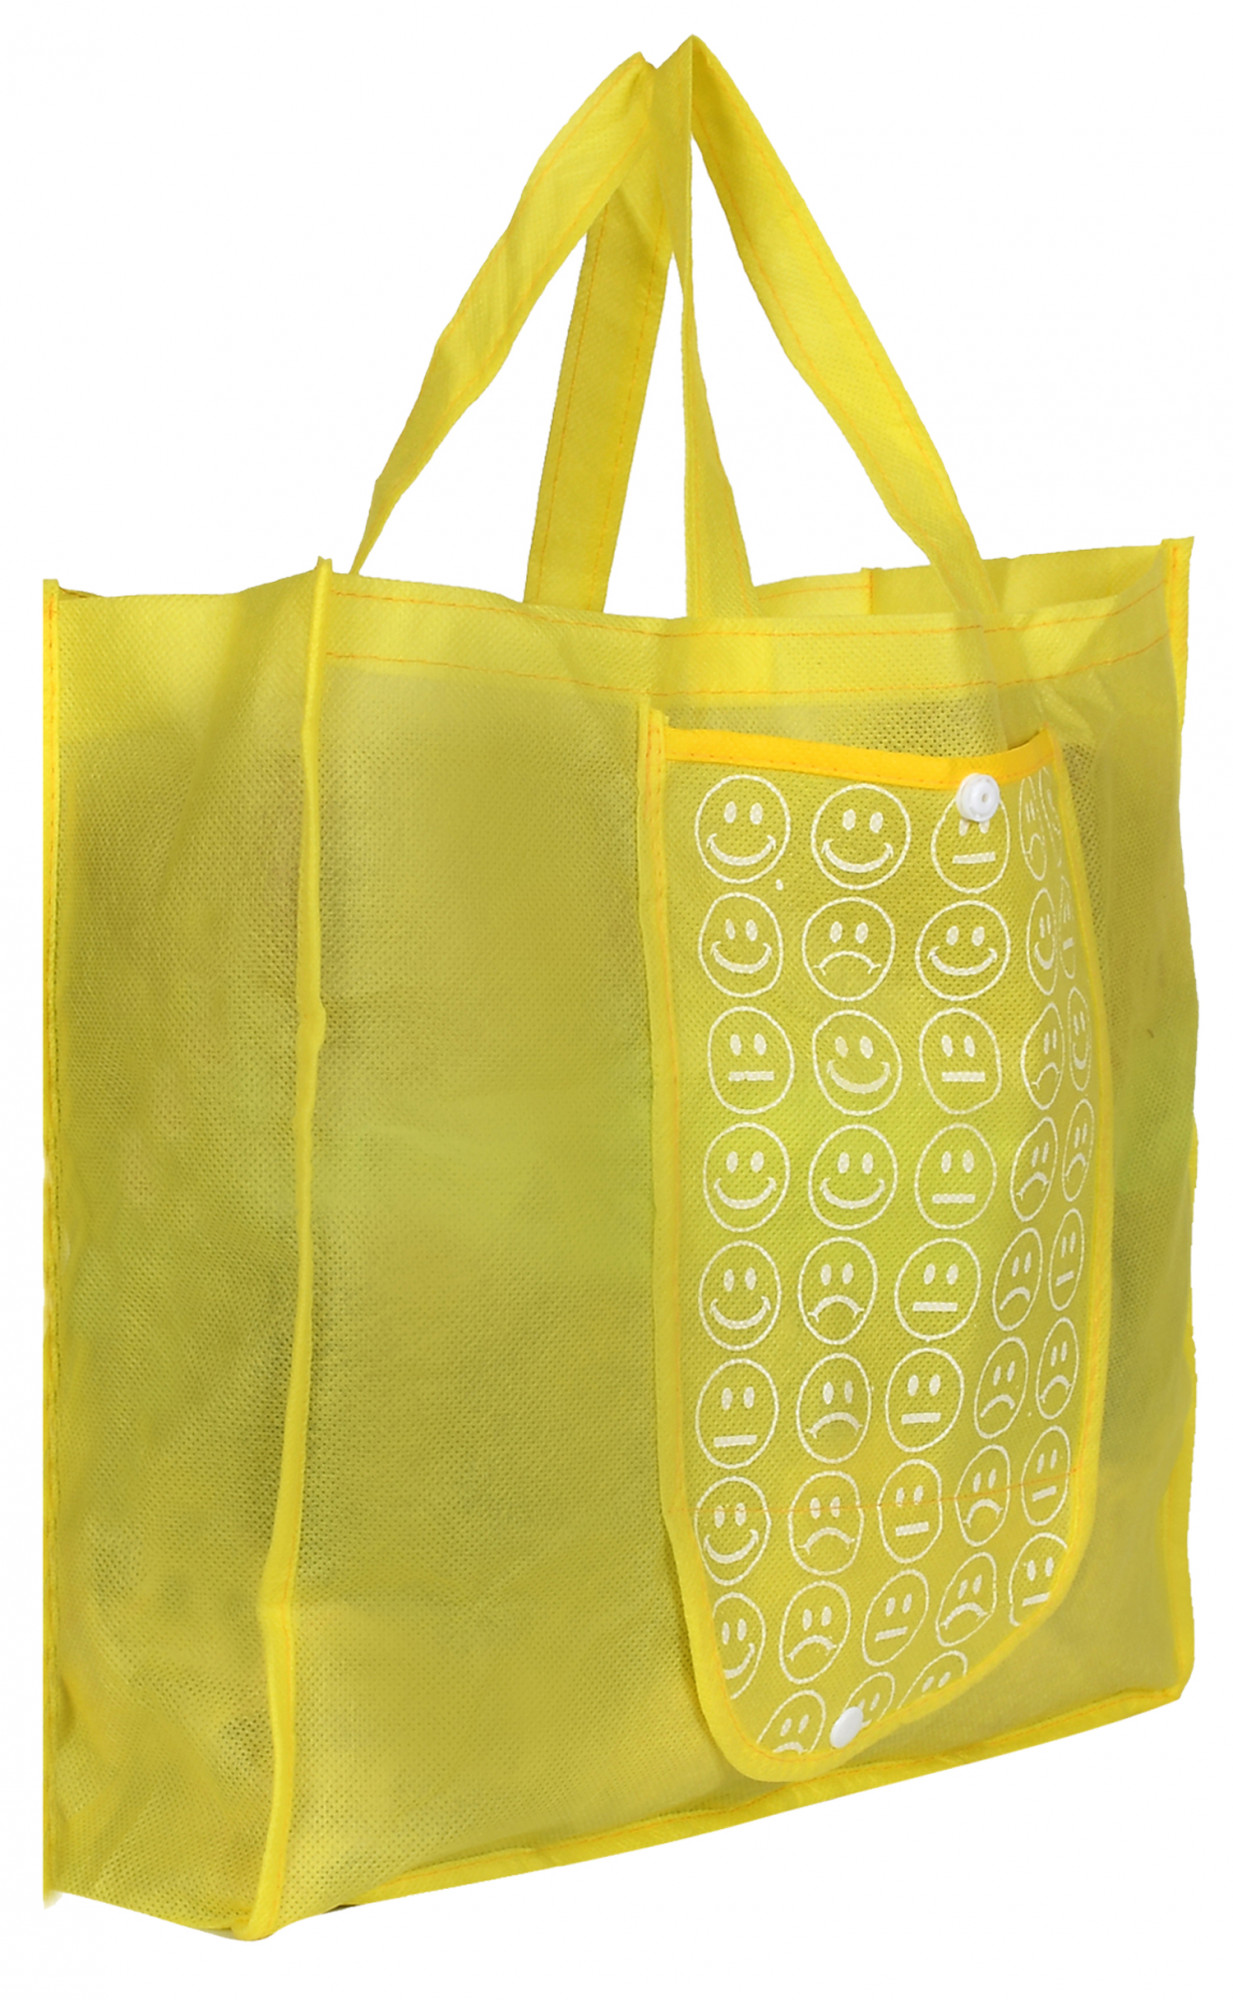 Kuber Industries Shopping Grocery Bags Foldable, Washable Grocery Tote Bag with One Small Pocket, Eco-Friendly Purse Bag Fits in Pocket Waterproof & Lightweight (Green & Yellow)